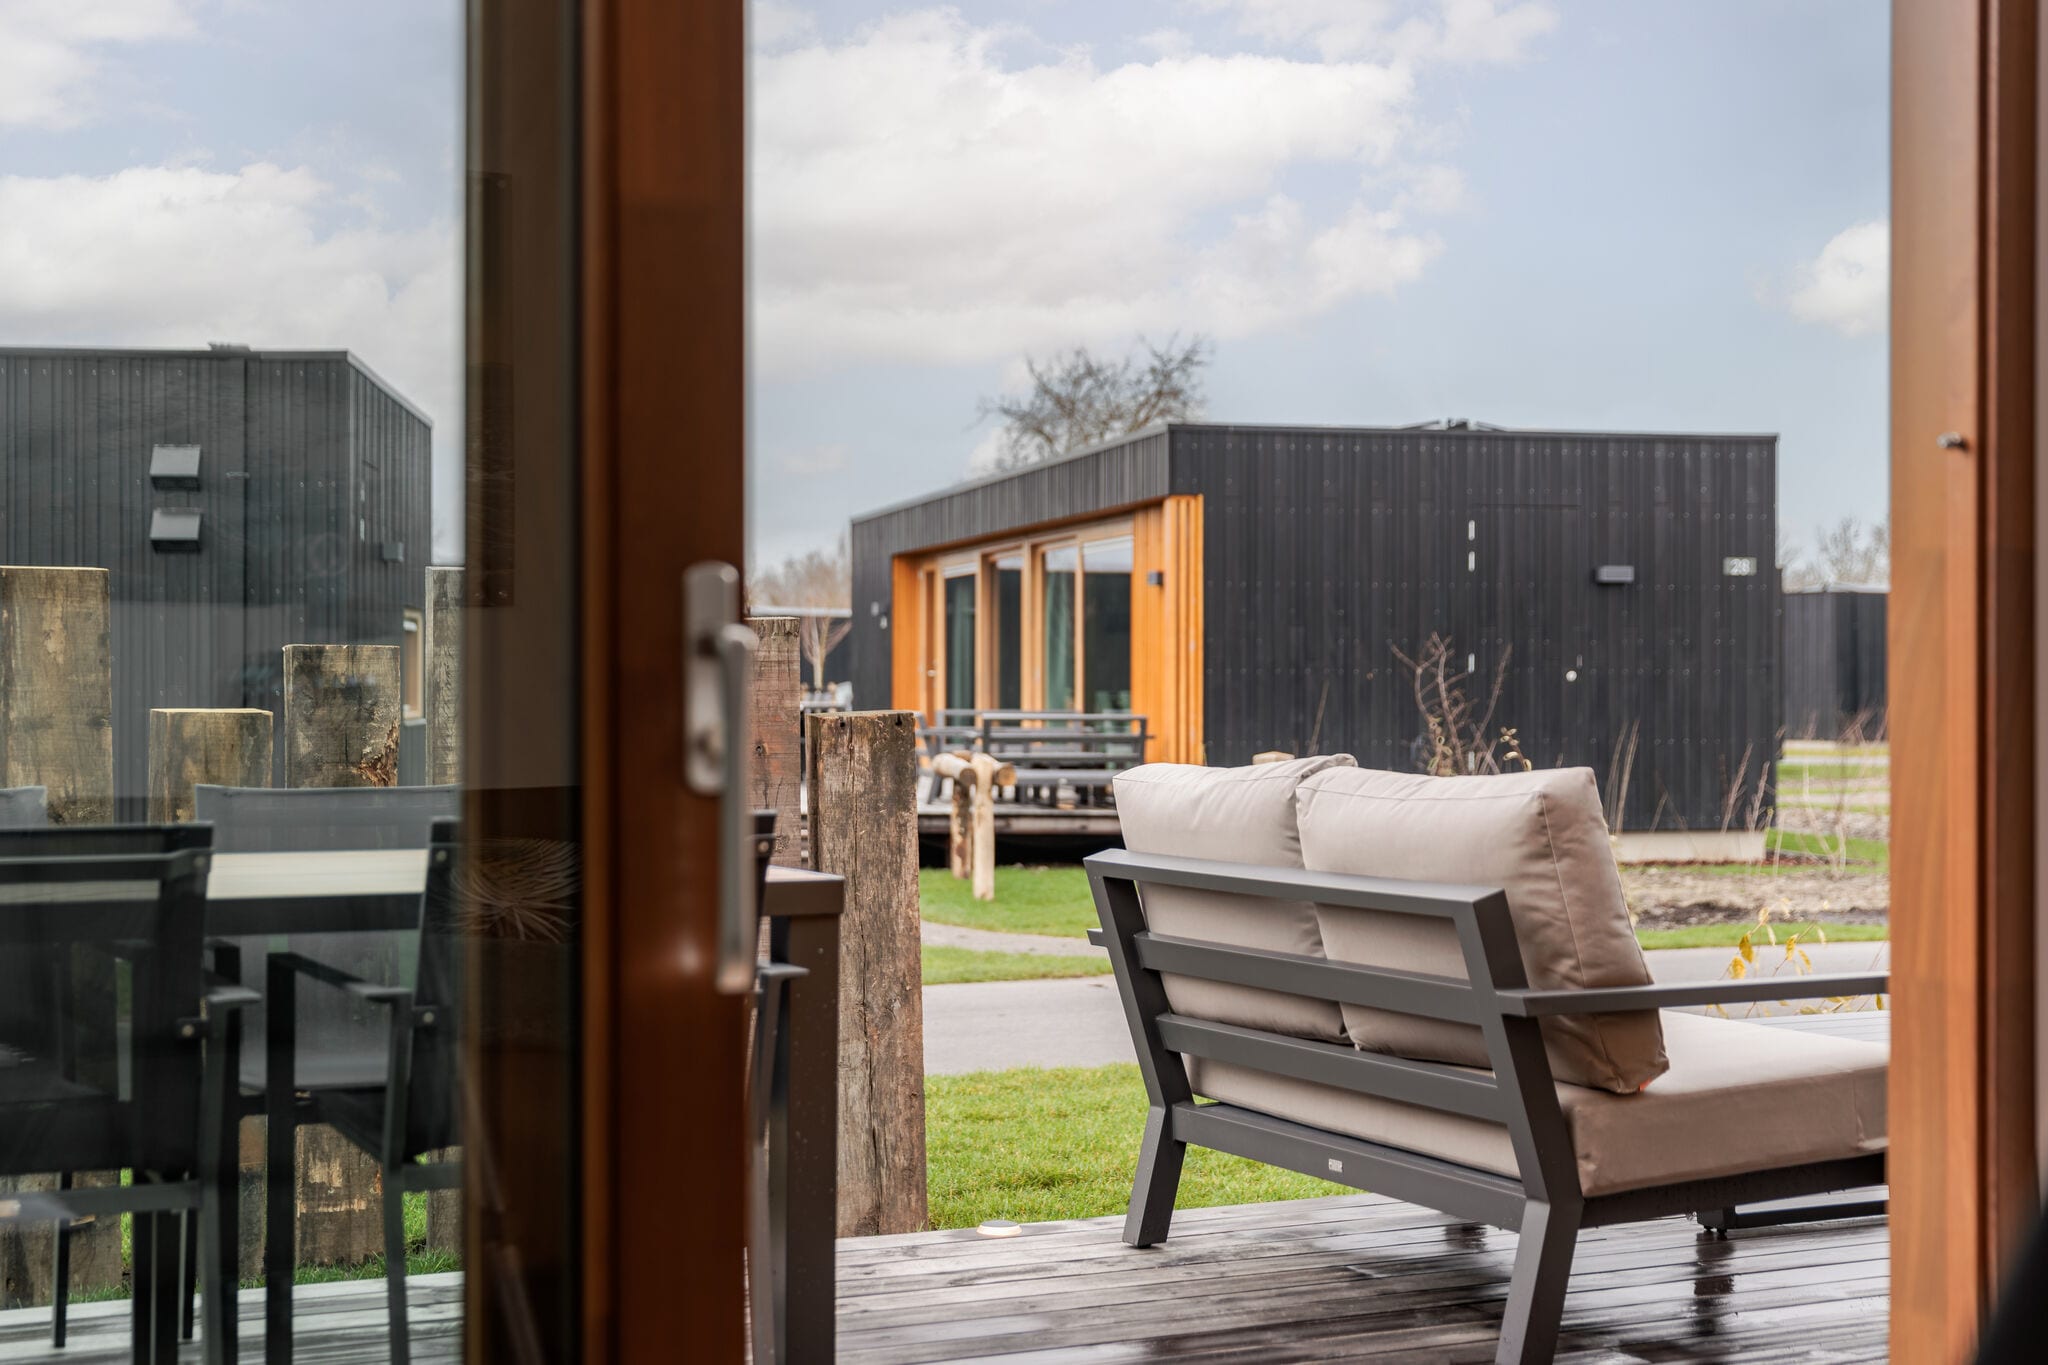 Comfortable lodge with airco, on a holiday park near the Grevelingenmeer